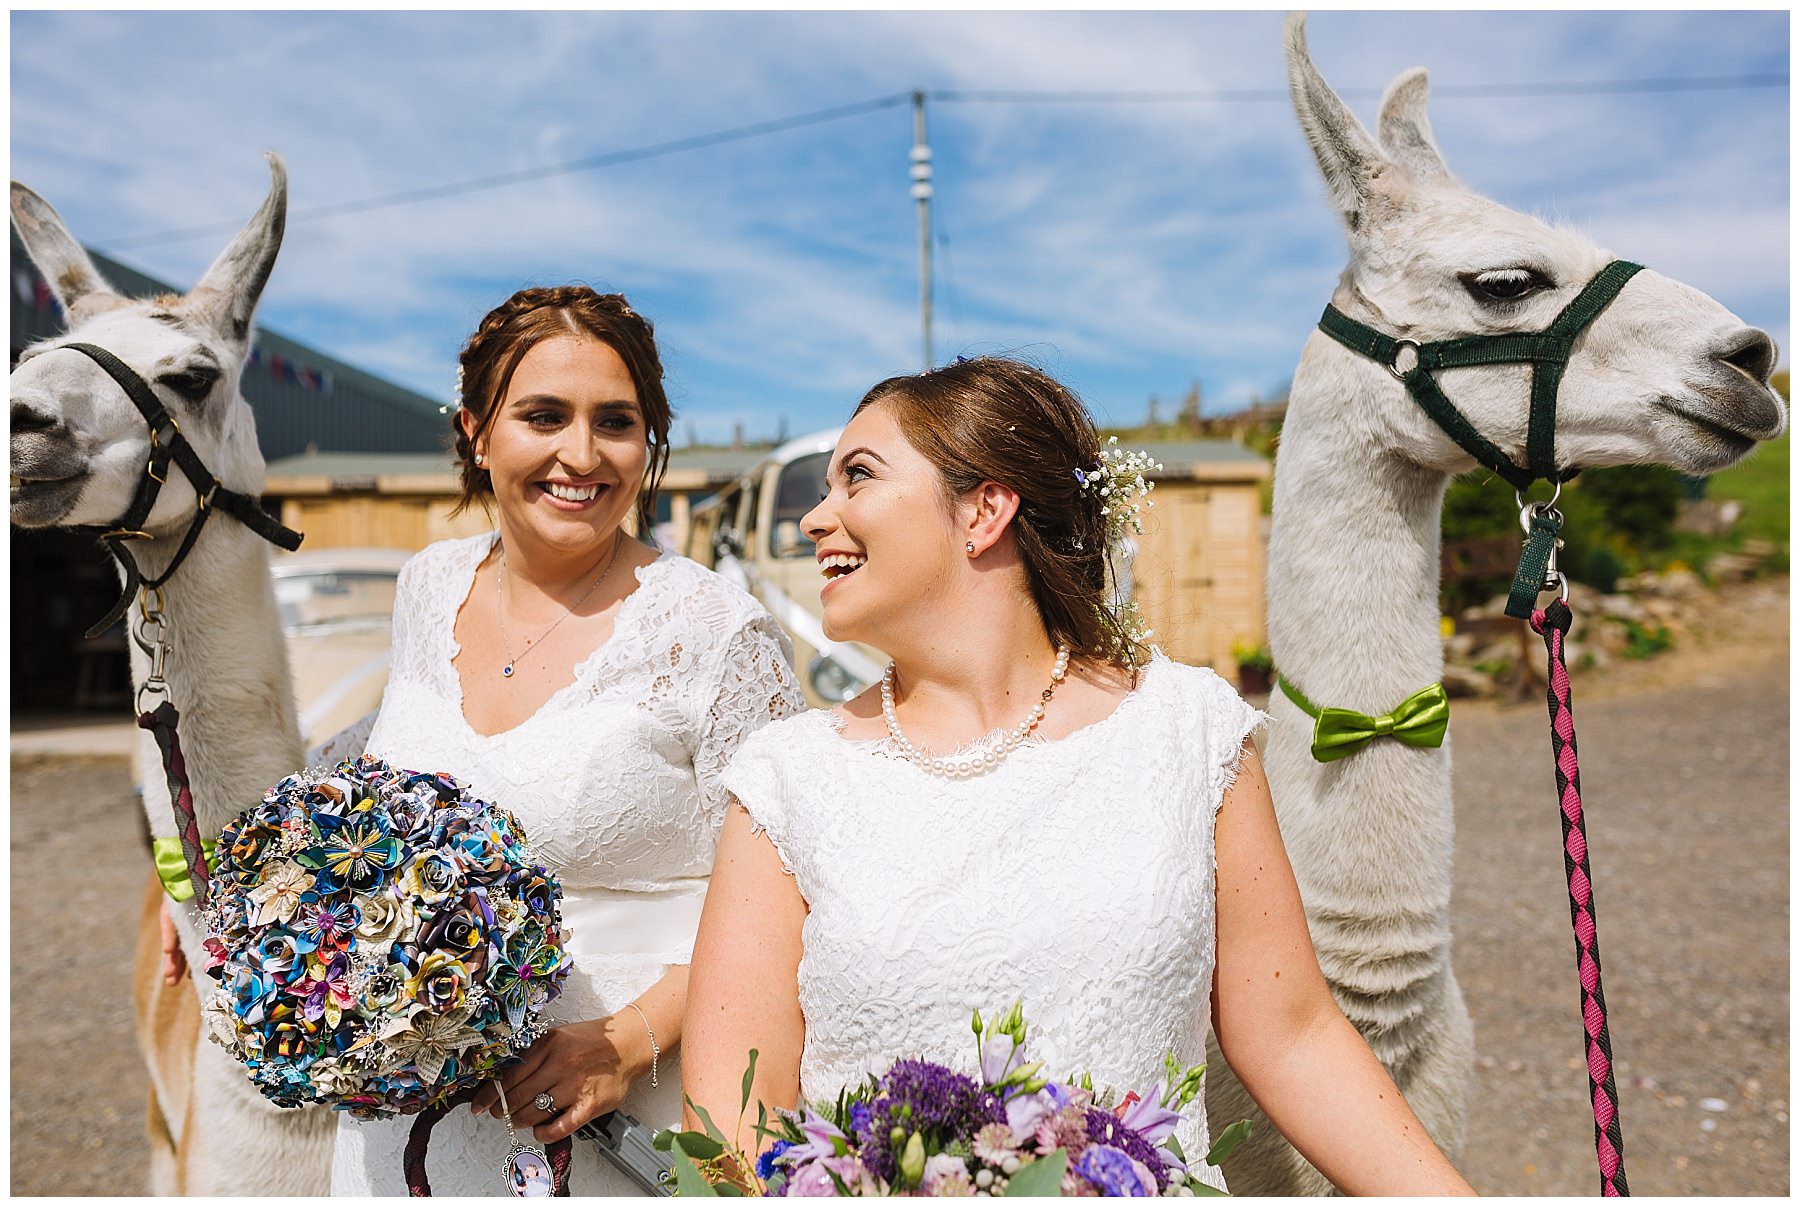 Natural wedding photography at the wellbeing farm